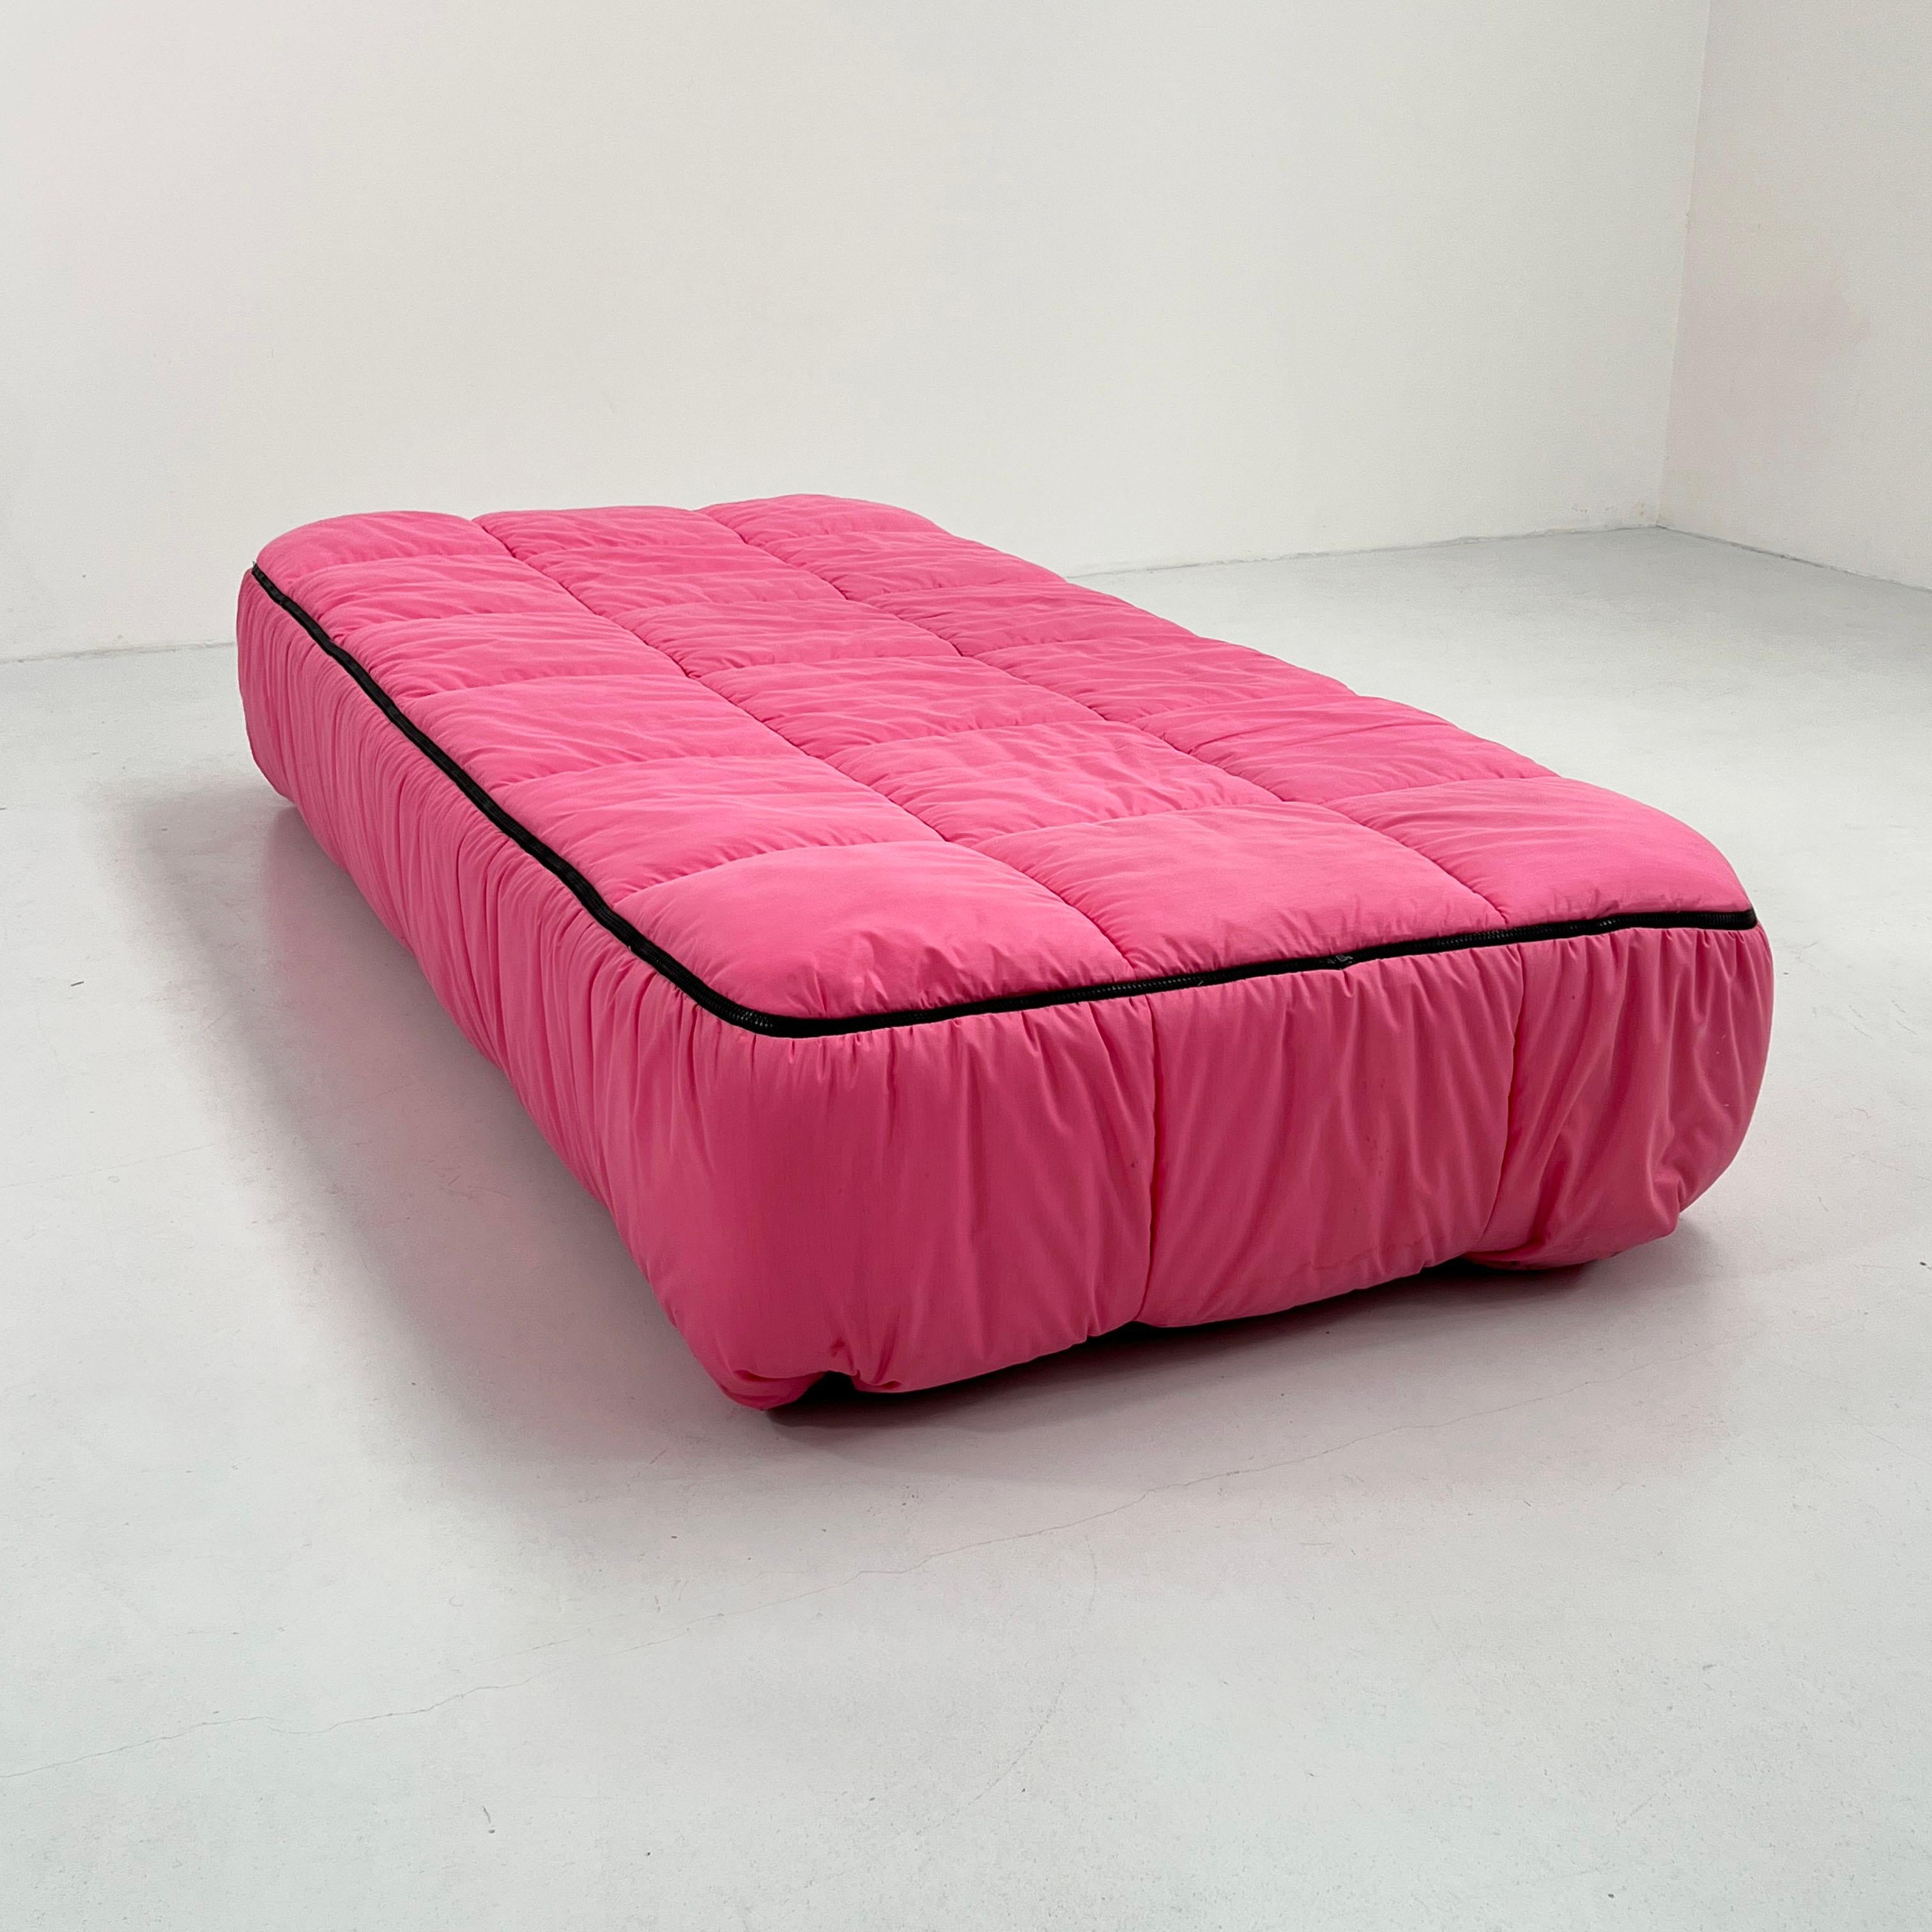 Late 20th Century Pink Sofa Bed by Cini Boeri for Arflex, 1970s